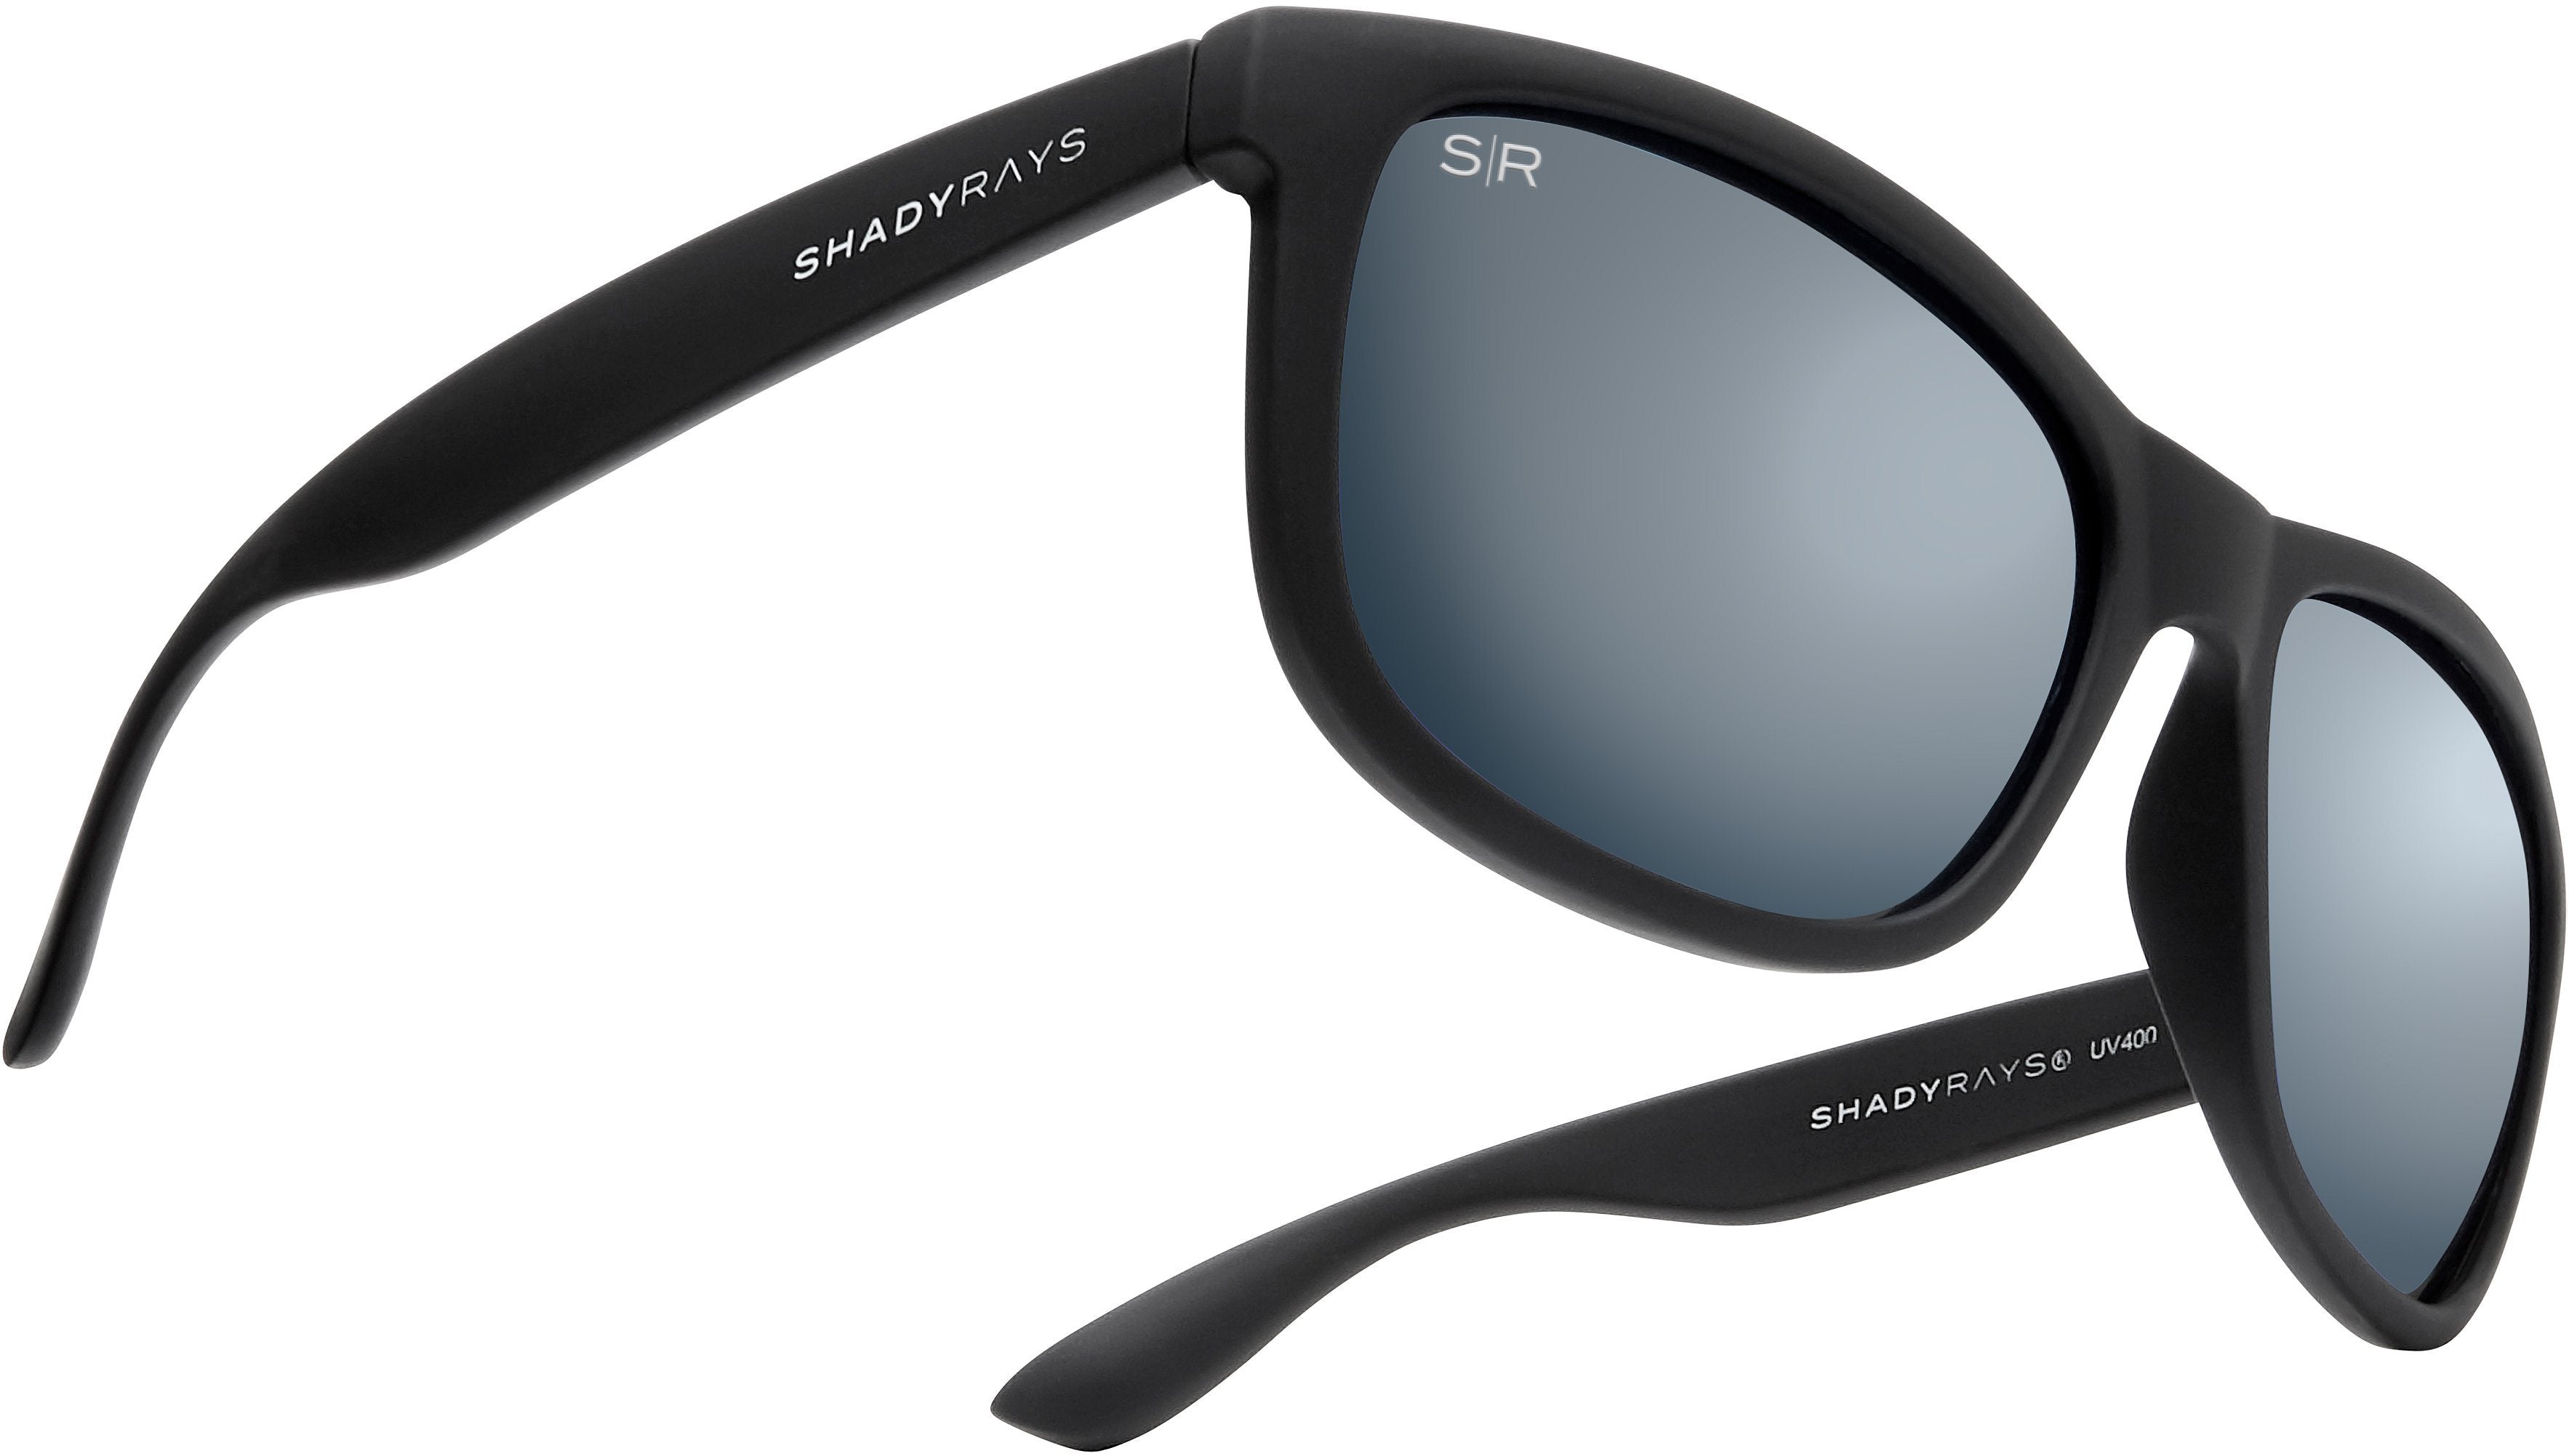 Signature Series - Black Slate SR Pro Polarized Sunglasses | Matte Black Sunglasses | Best Christmas Gifts | Gifts for The Holidays | Unique Gifts for